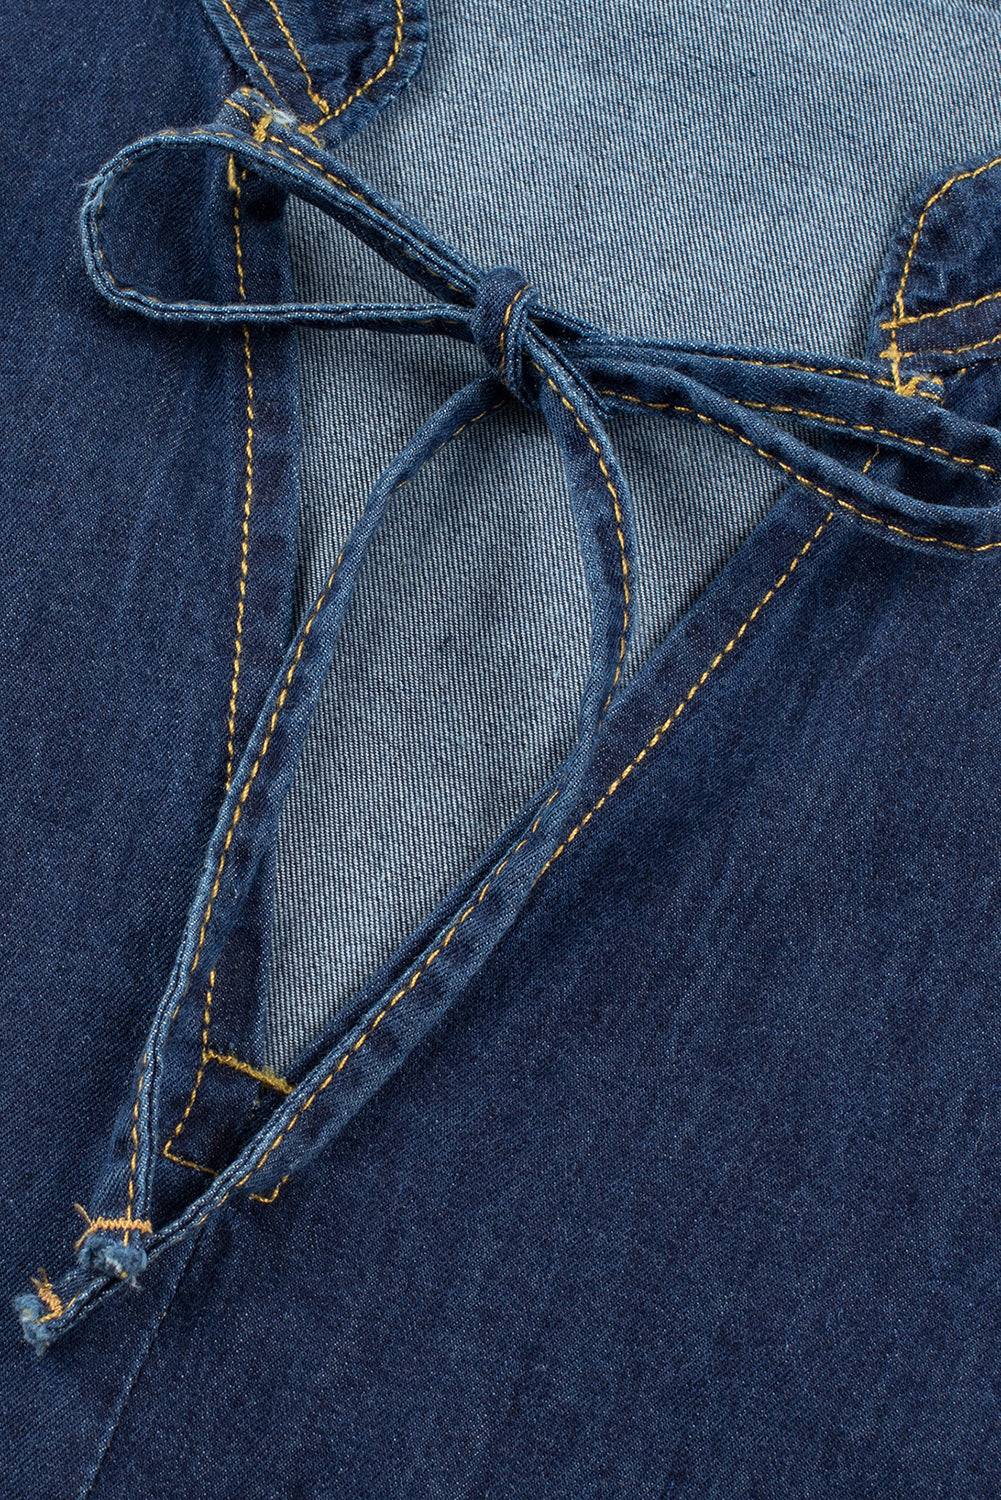 a close up of a pair of jeans with a tie